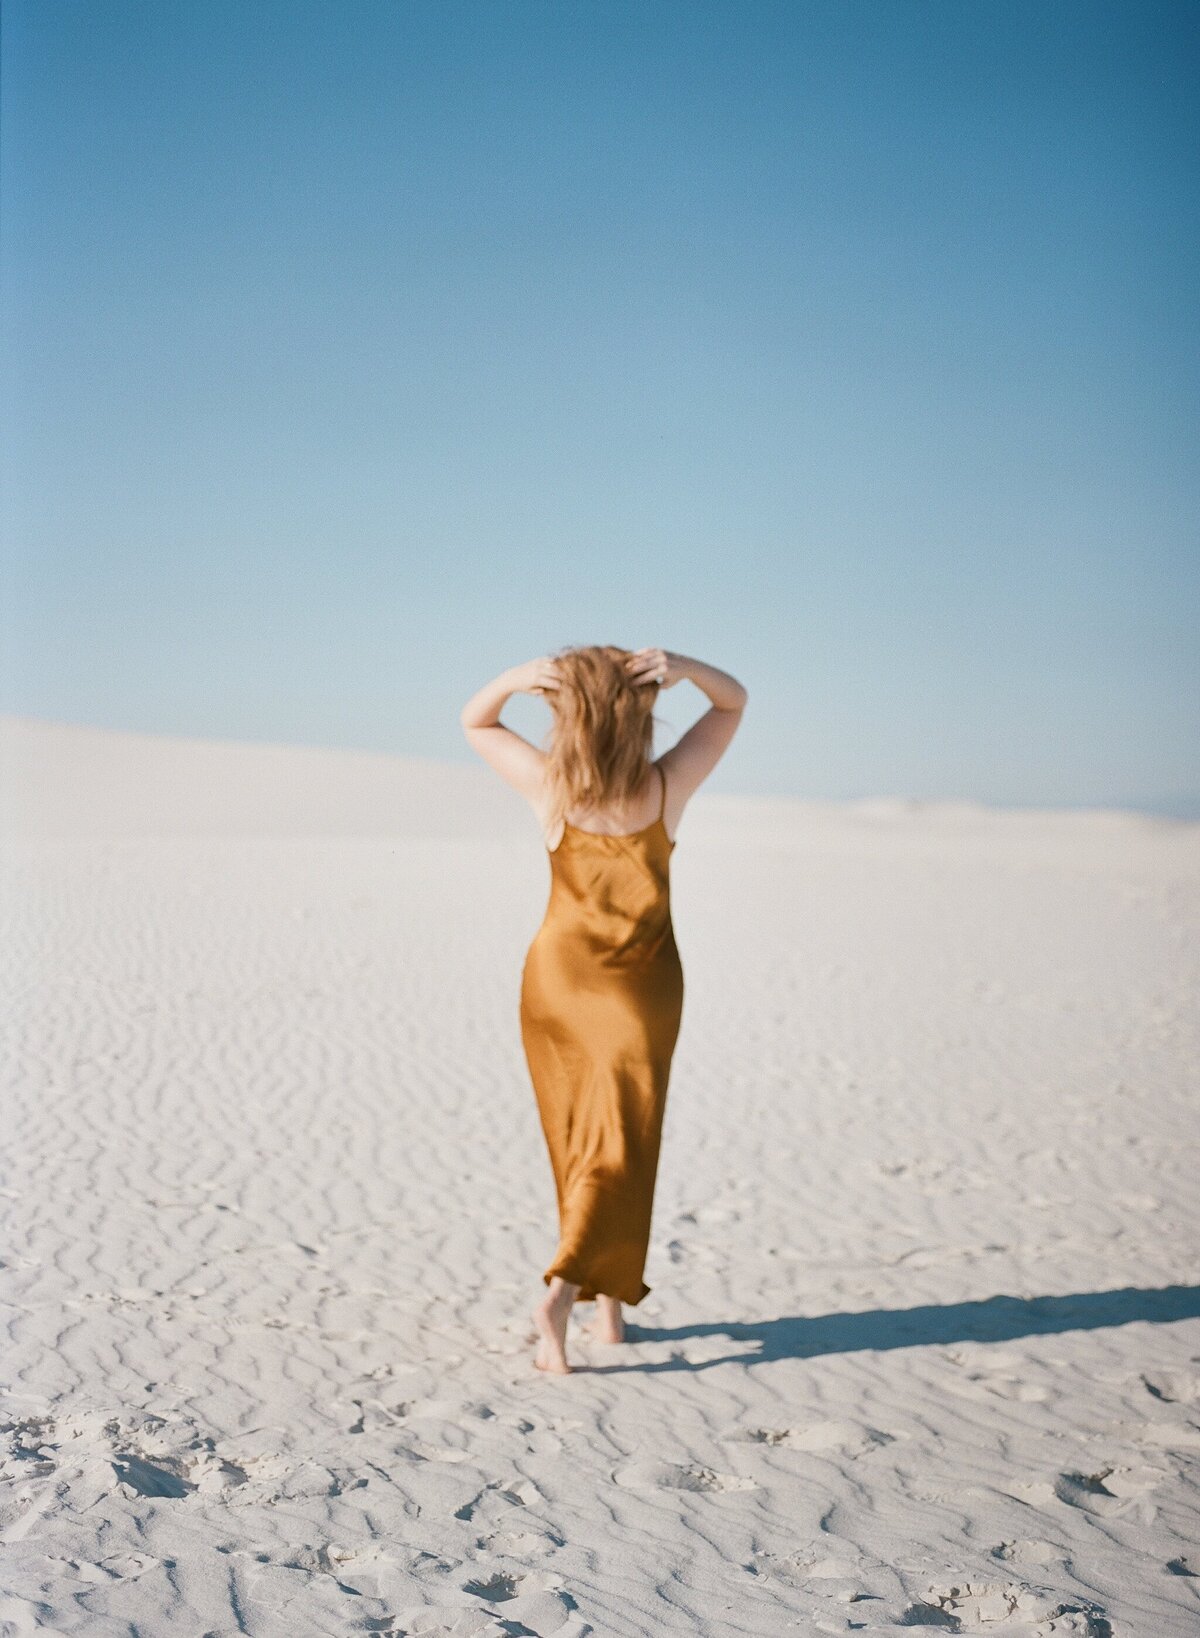 Woman with auburn hair and dress in white sands